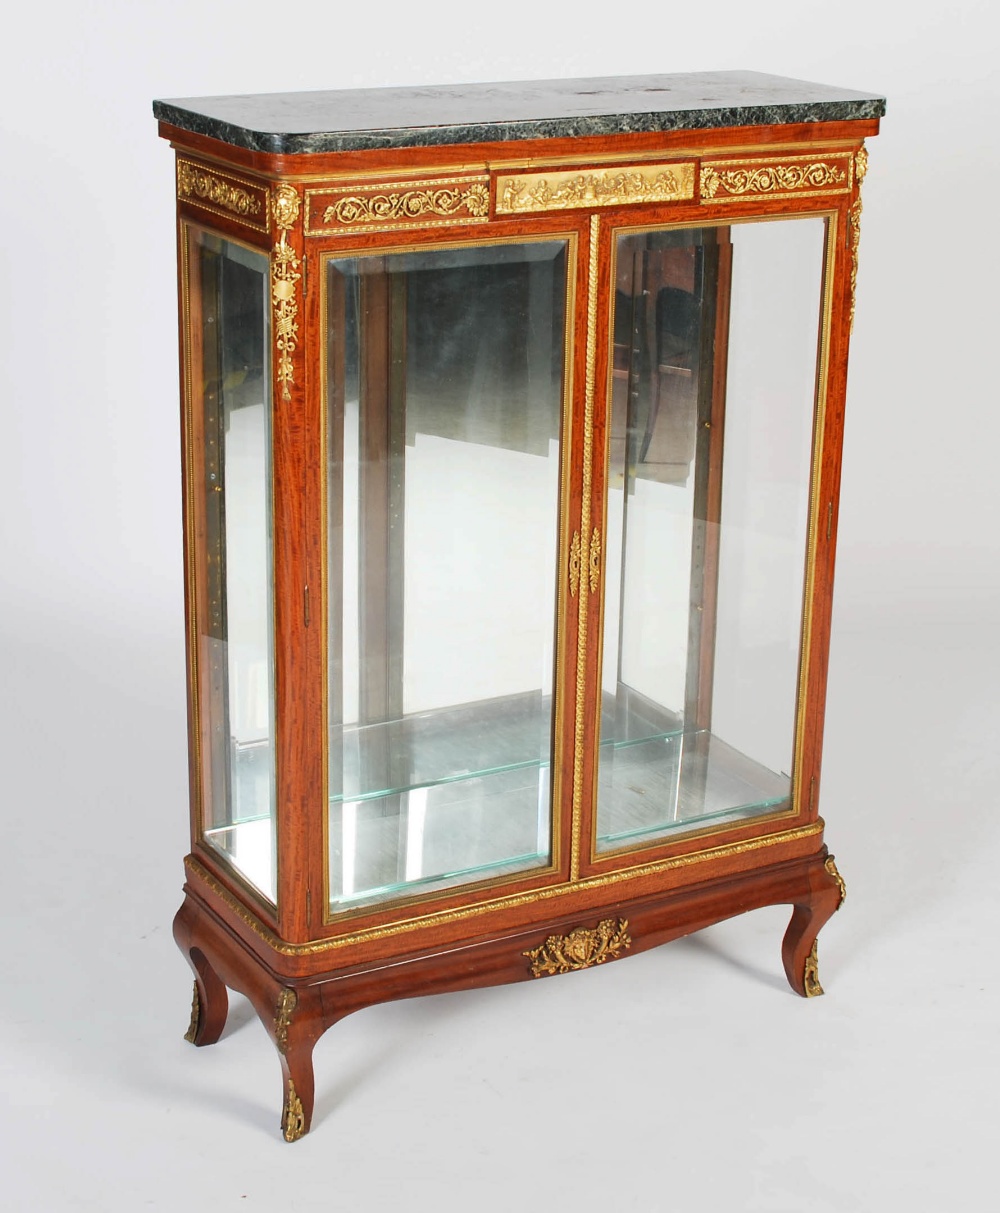 A late 19th century French satinwood and gilt metal mounted side cabinet, the mottled black, white